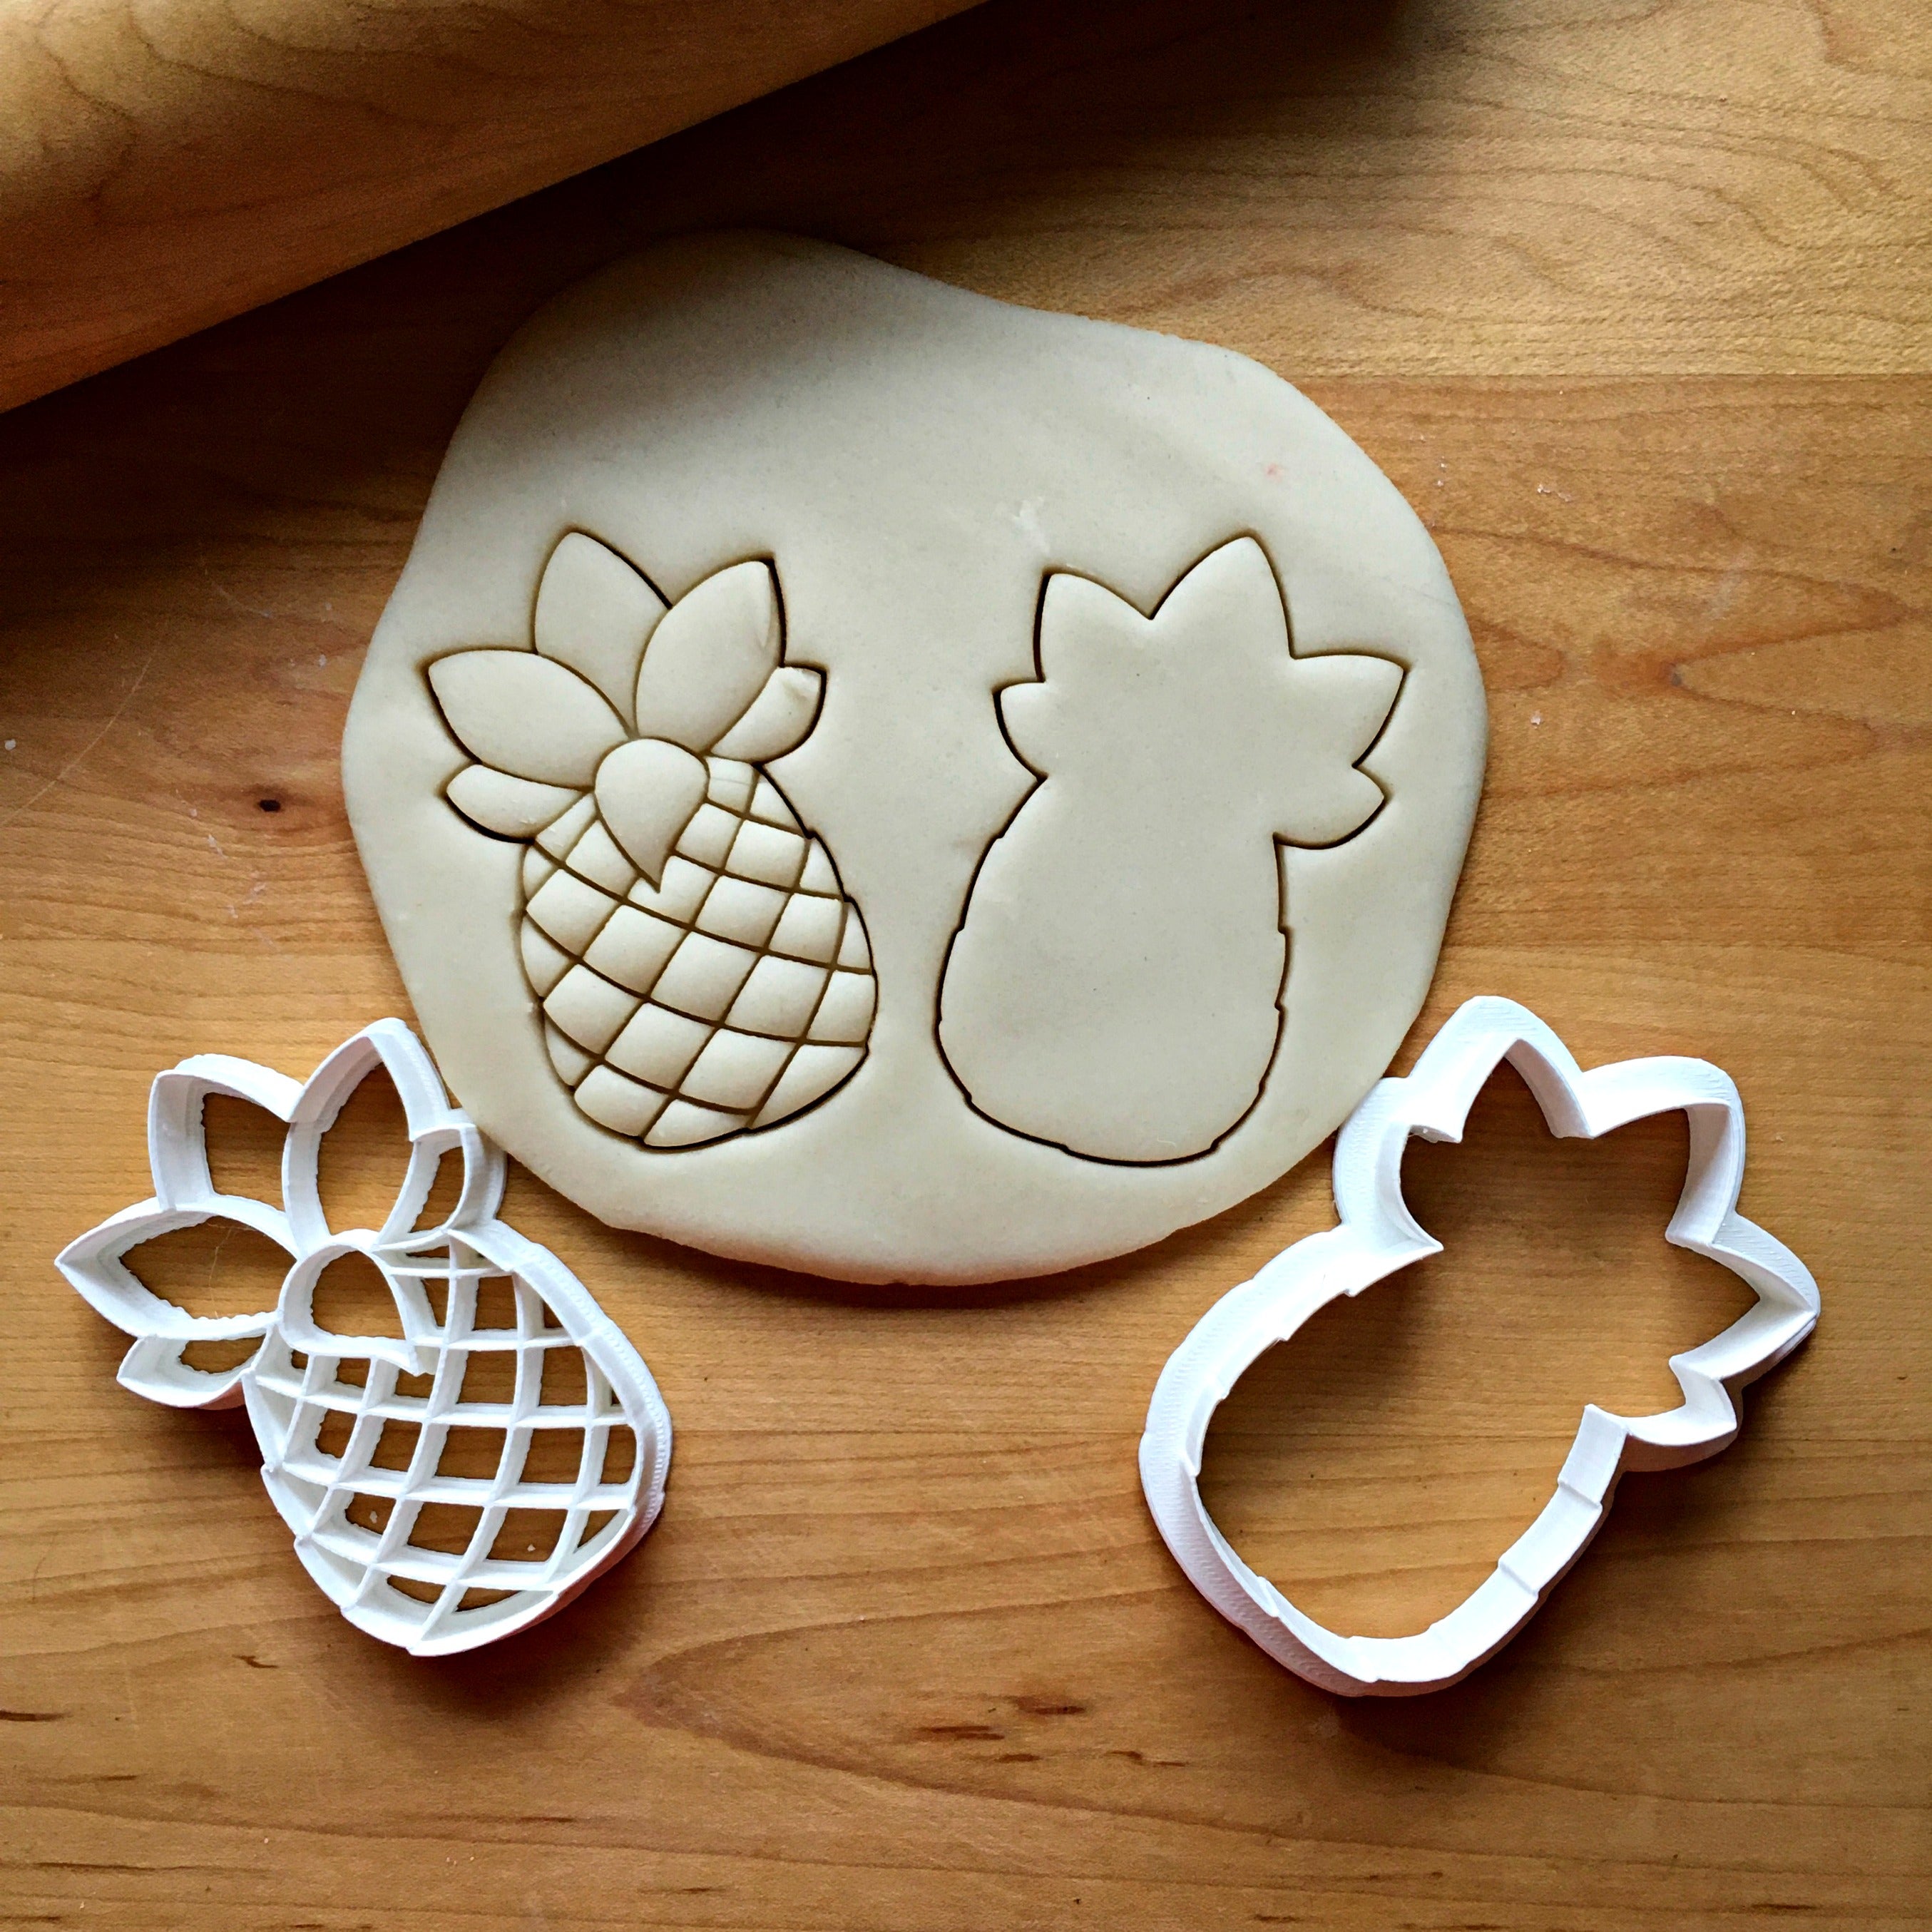 Set of 2 Pineapple Cookie Cutters/Dishwasher Safe